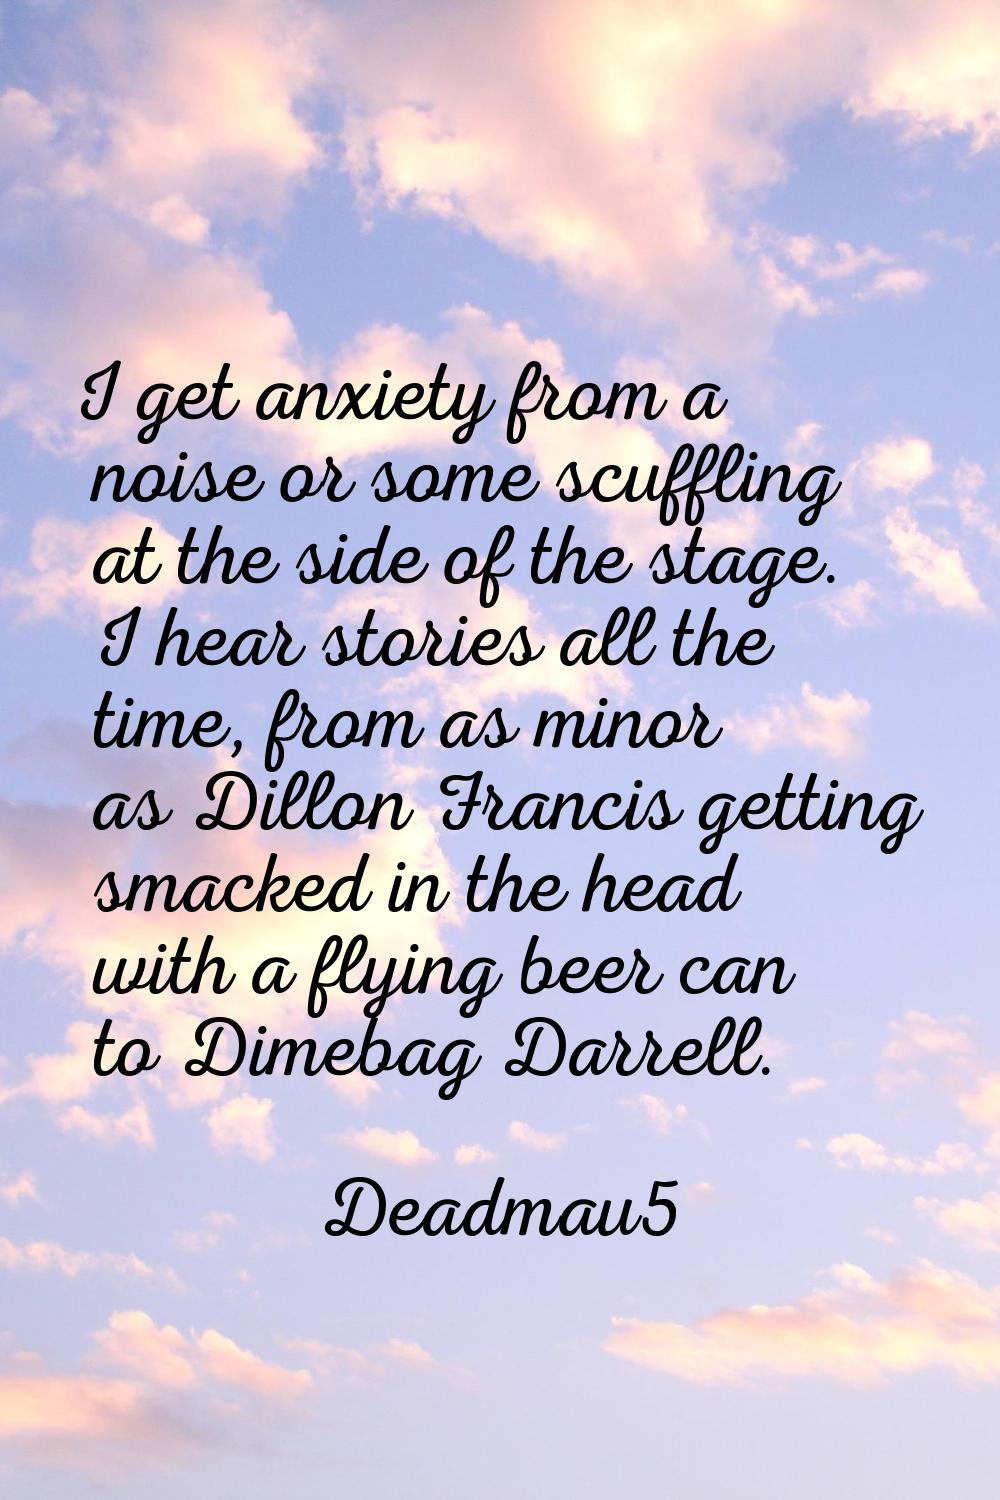 I get anxiety from a noise or some scuffling at the side of the stage. I hear stories all the time,